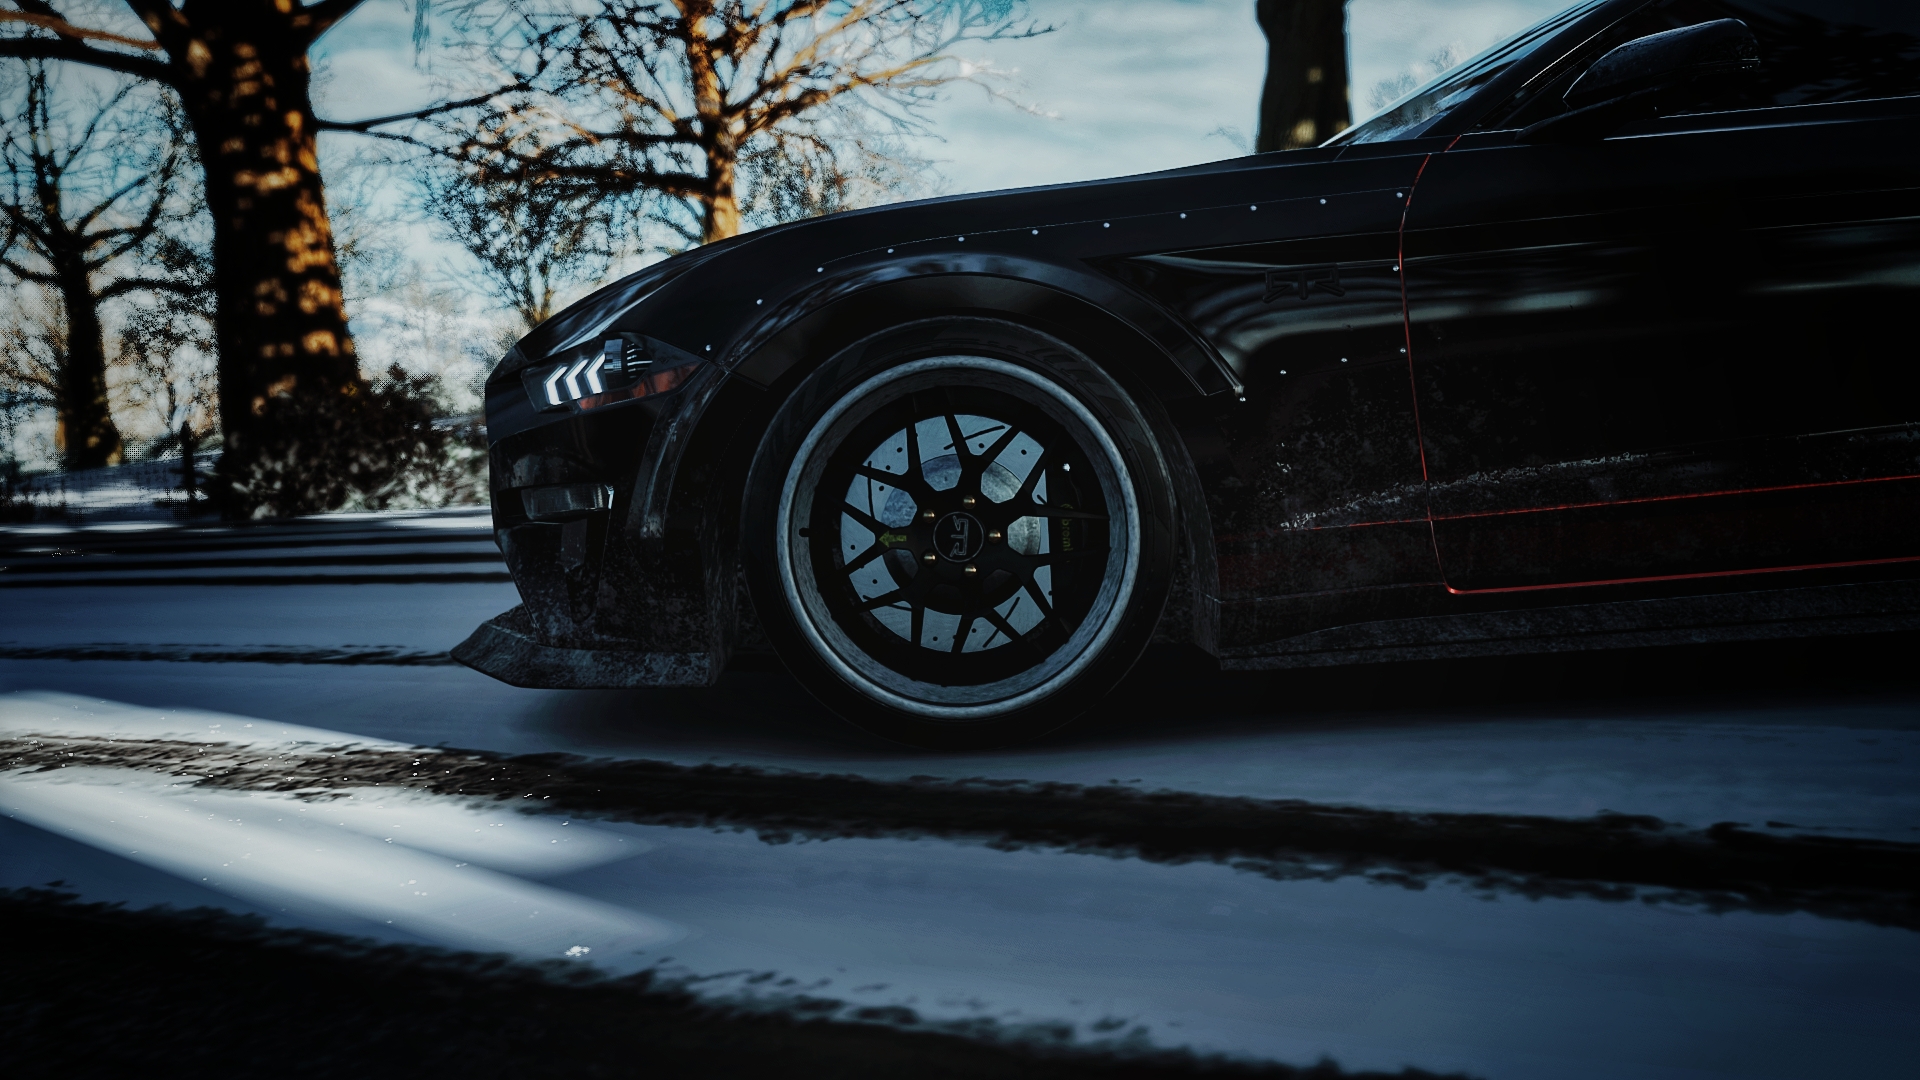 General 1920x1080 Ford Mustang RTR Ford Ford Mustang car winter Ford Mustang S550 Forza Horizon 4 headlights side view video games video game art screen shot snow trees CGI muscle cars American cars Turn 10 Studios PlaygroundGames Xbox Game Studios V8 engine